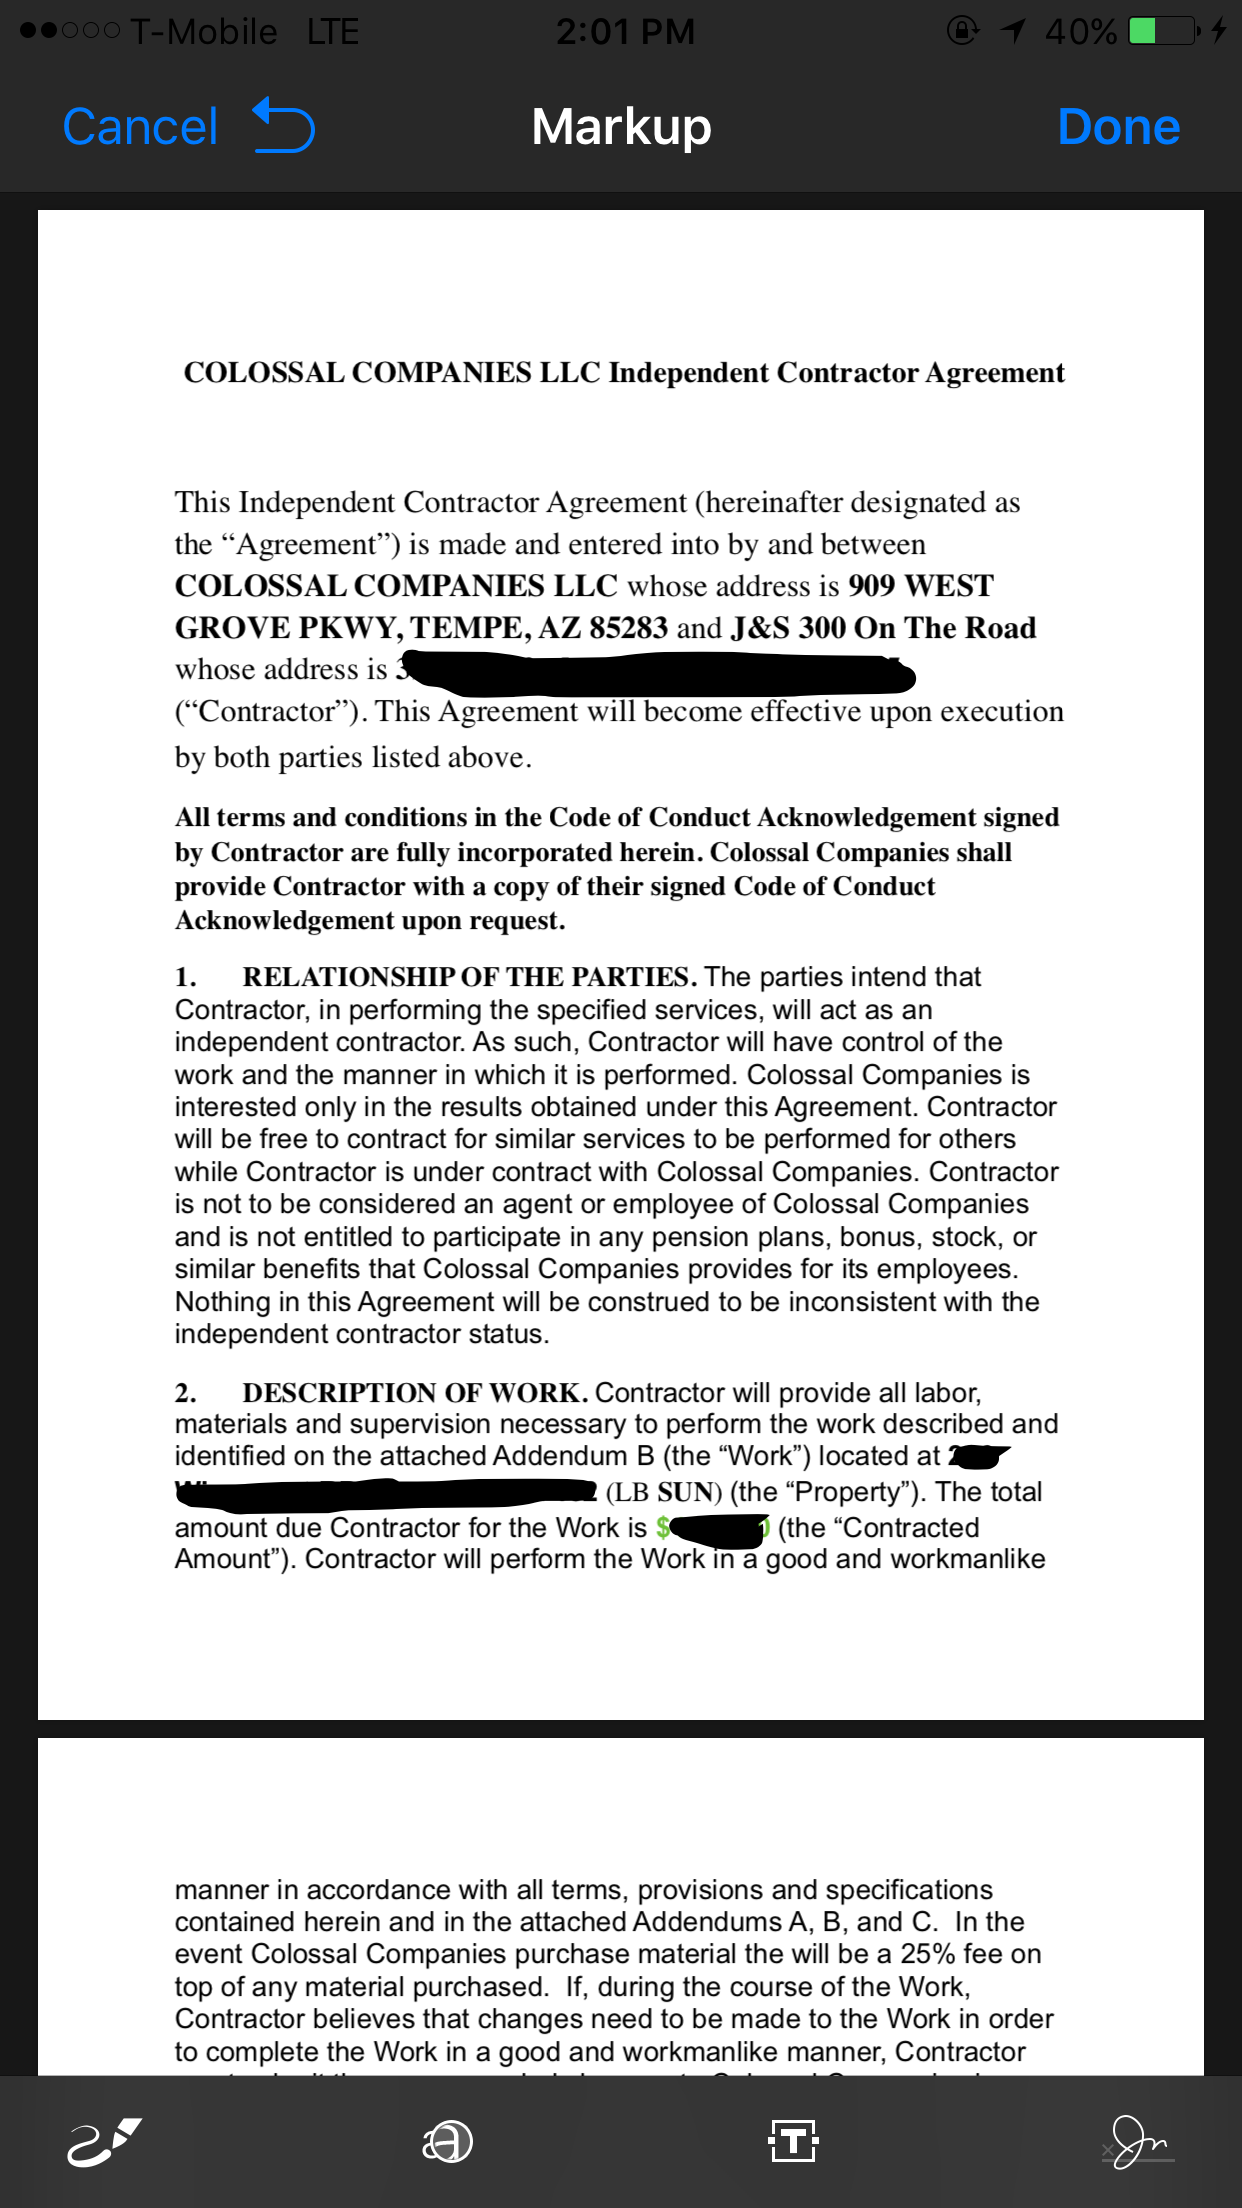 The first page of what seemed like a legit contract.